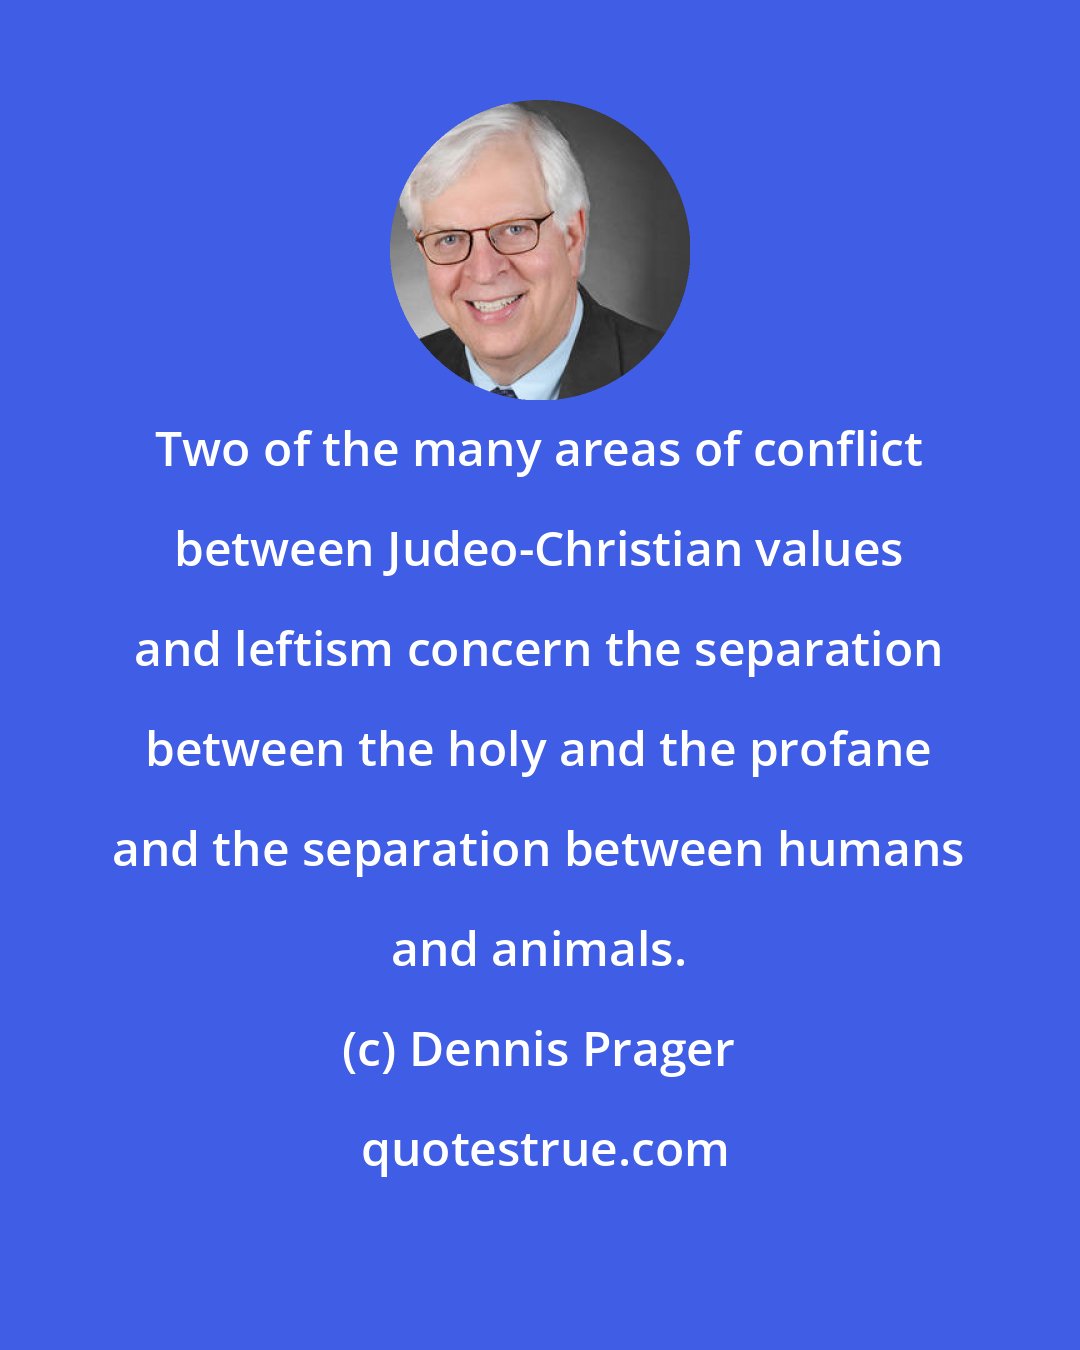 Dennis Prager: Two of the many areas of conflict between Judeo-Christian values and leftism concern the separation between the holy and the profane and the separation between humans and animals.